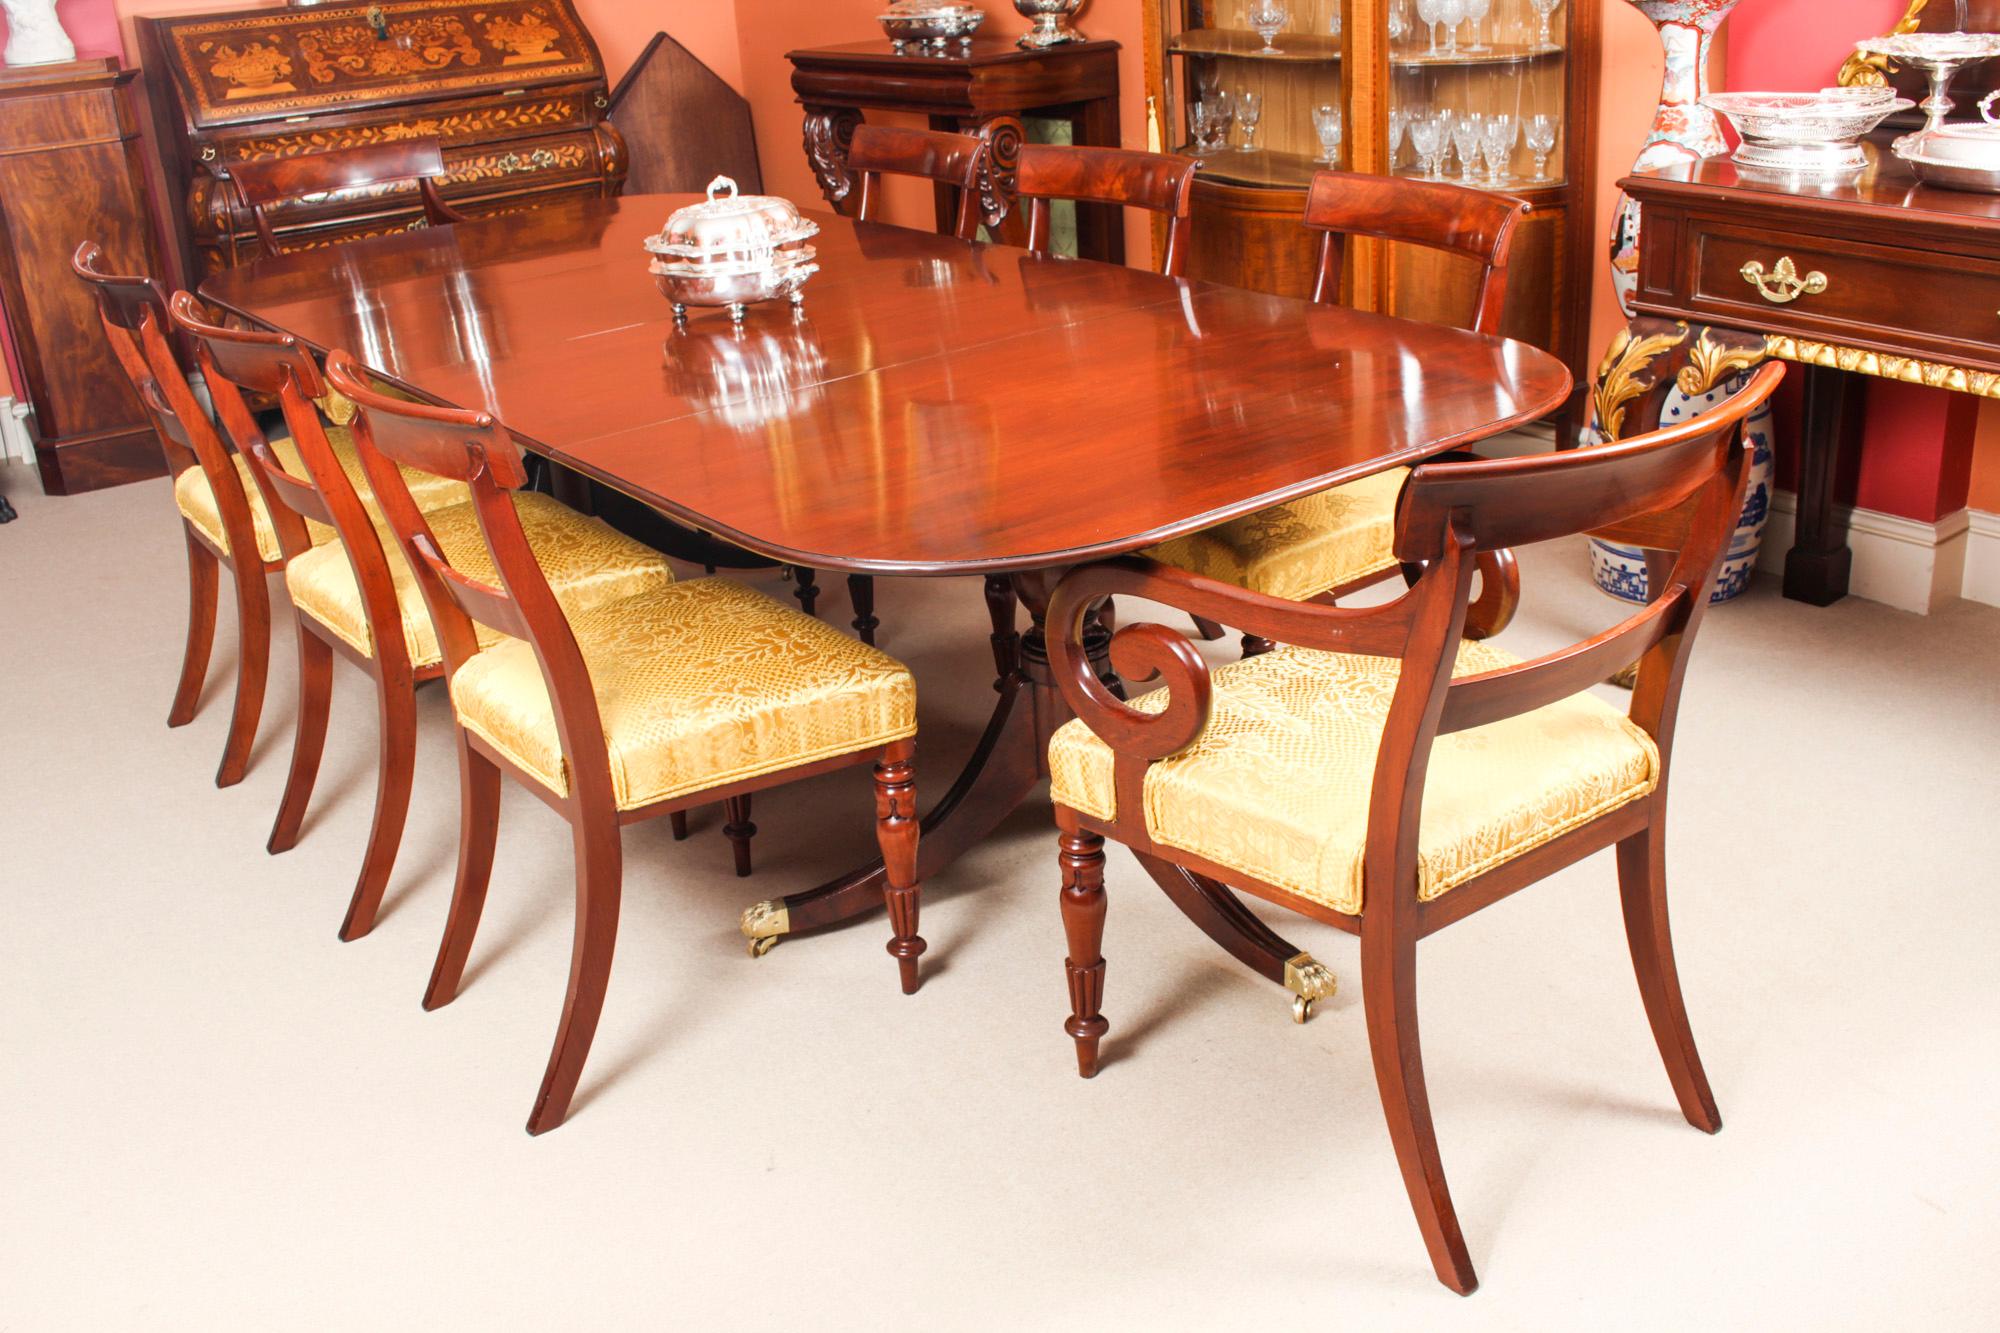 This is an elegant dining set comprising an antique George III dining table, Circa 1780 in date, with a fabulous set of eight mahogany George III barback dining chairs, circa 1830 in date

The table is raised on twin bases each with turned pillars